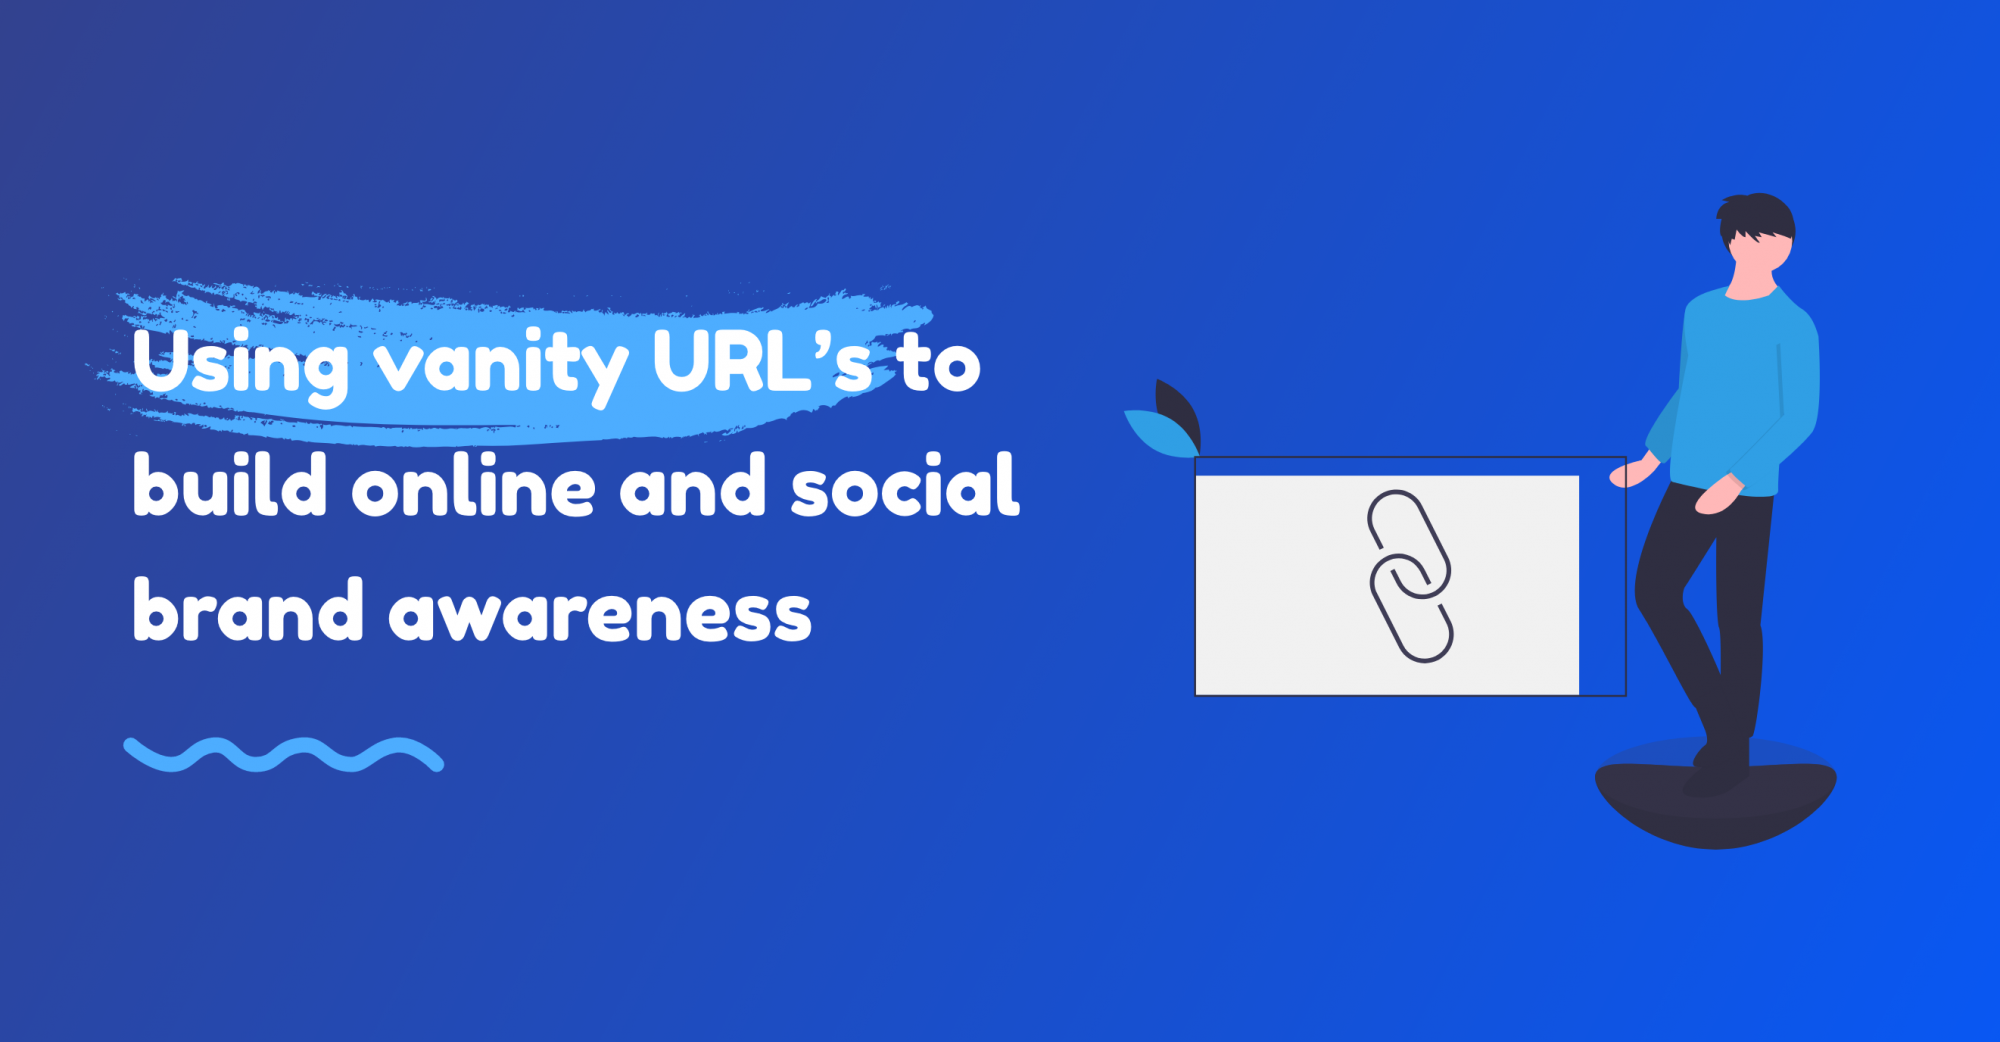 Using vanity URL's to build online and social brand awareness